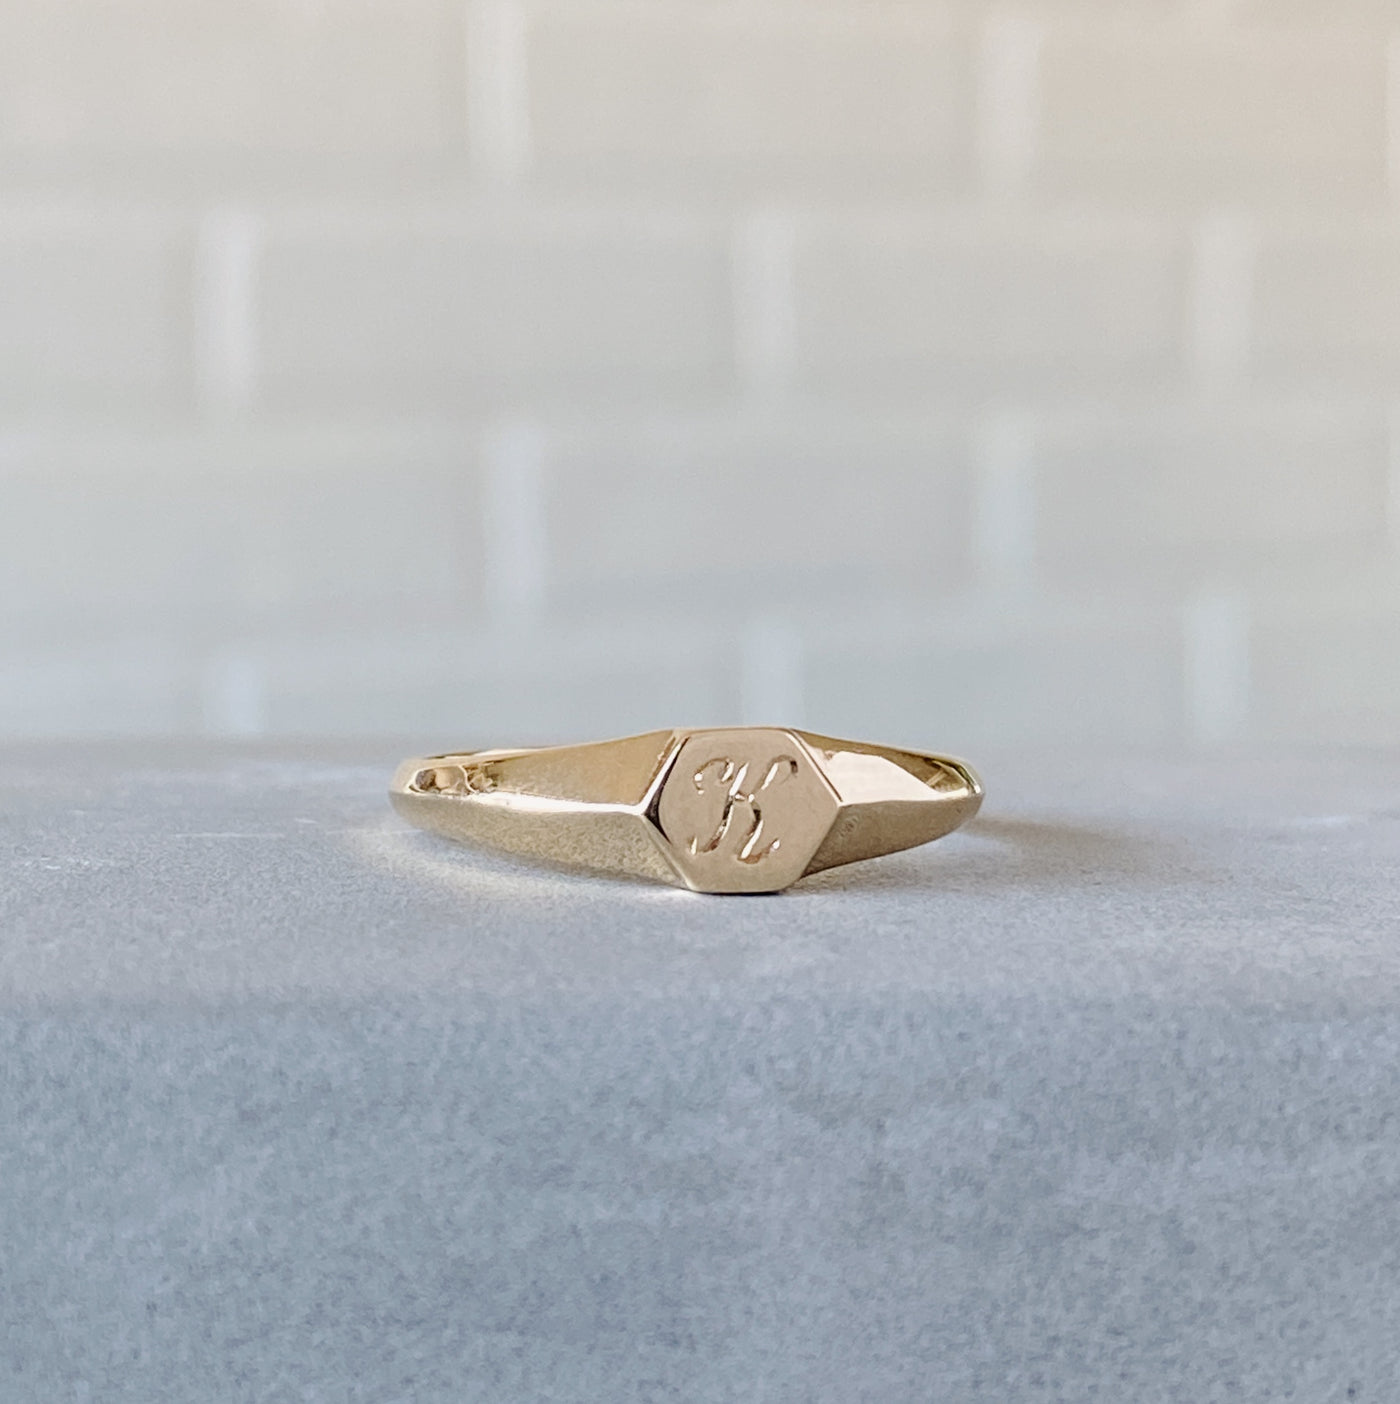 Low profile gold signet ring with hexagon top and engraved single script "K" initial